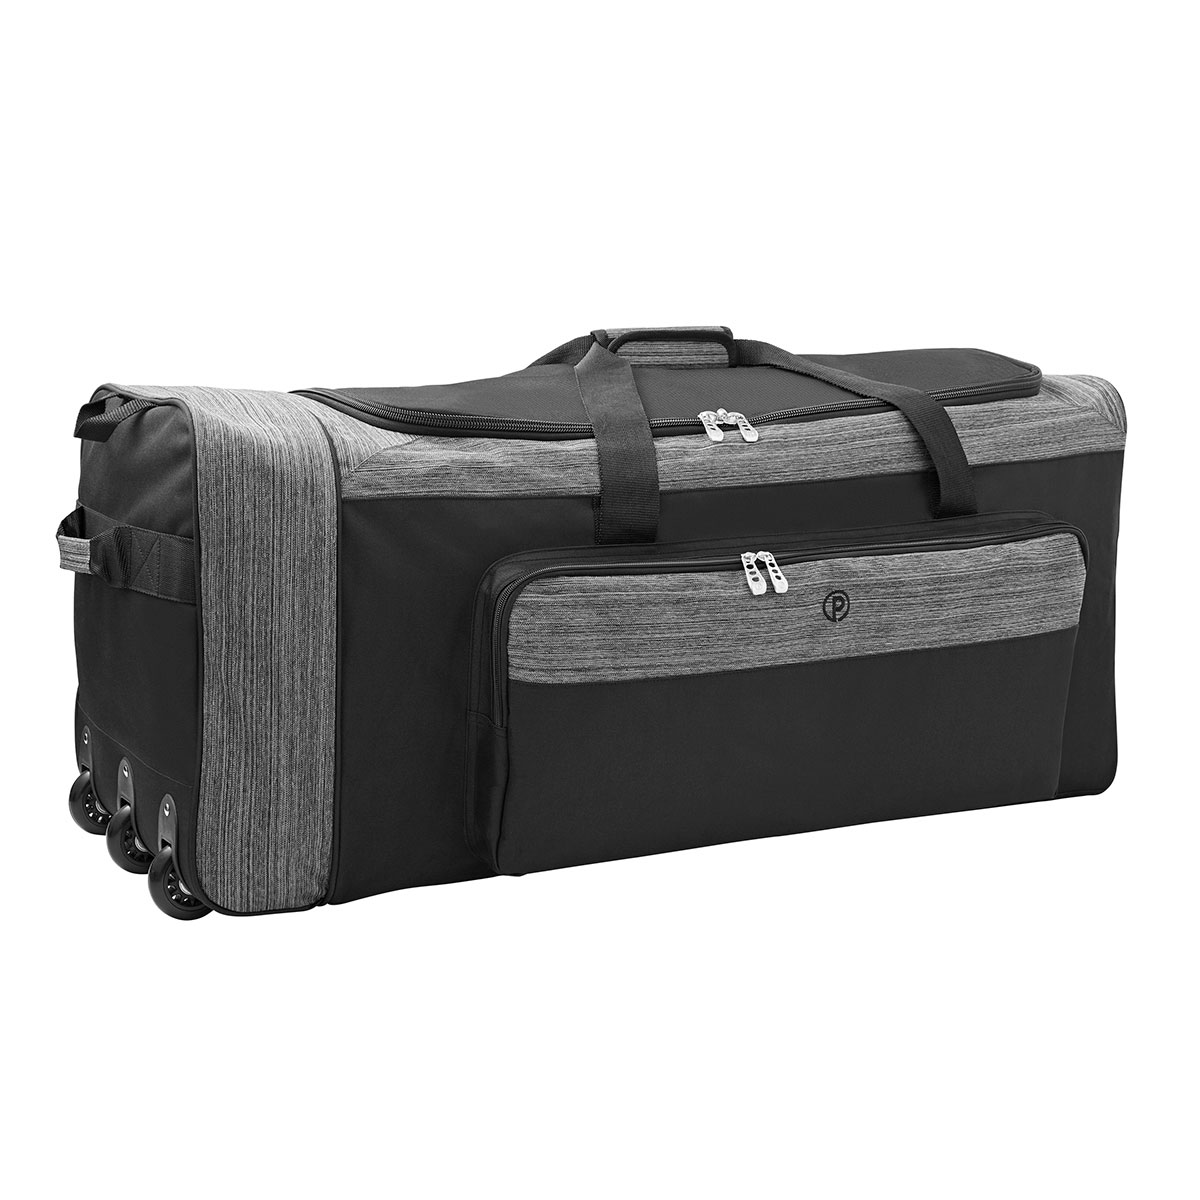 Protege 36" Tri-Fold Polyester Rolling Trunk Duffel for Travel (Walmart Exclusive) - image 1 of 8